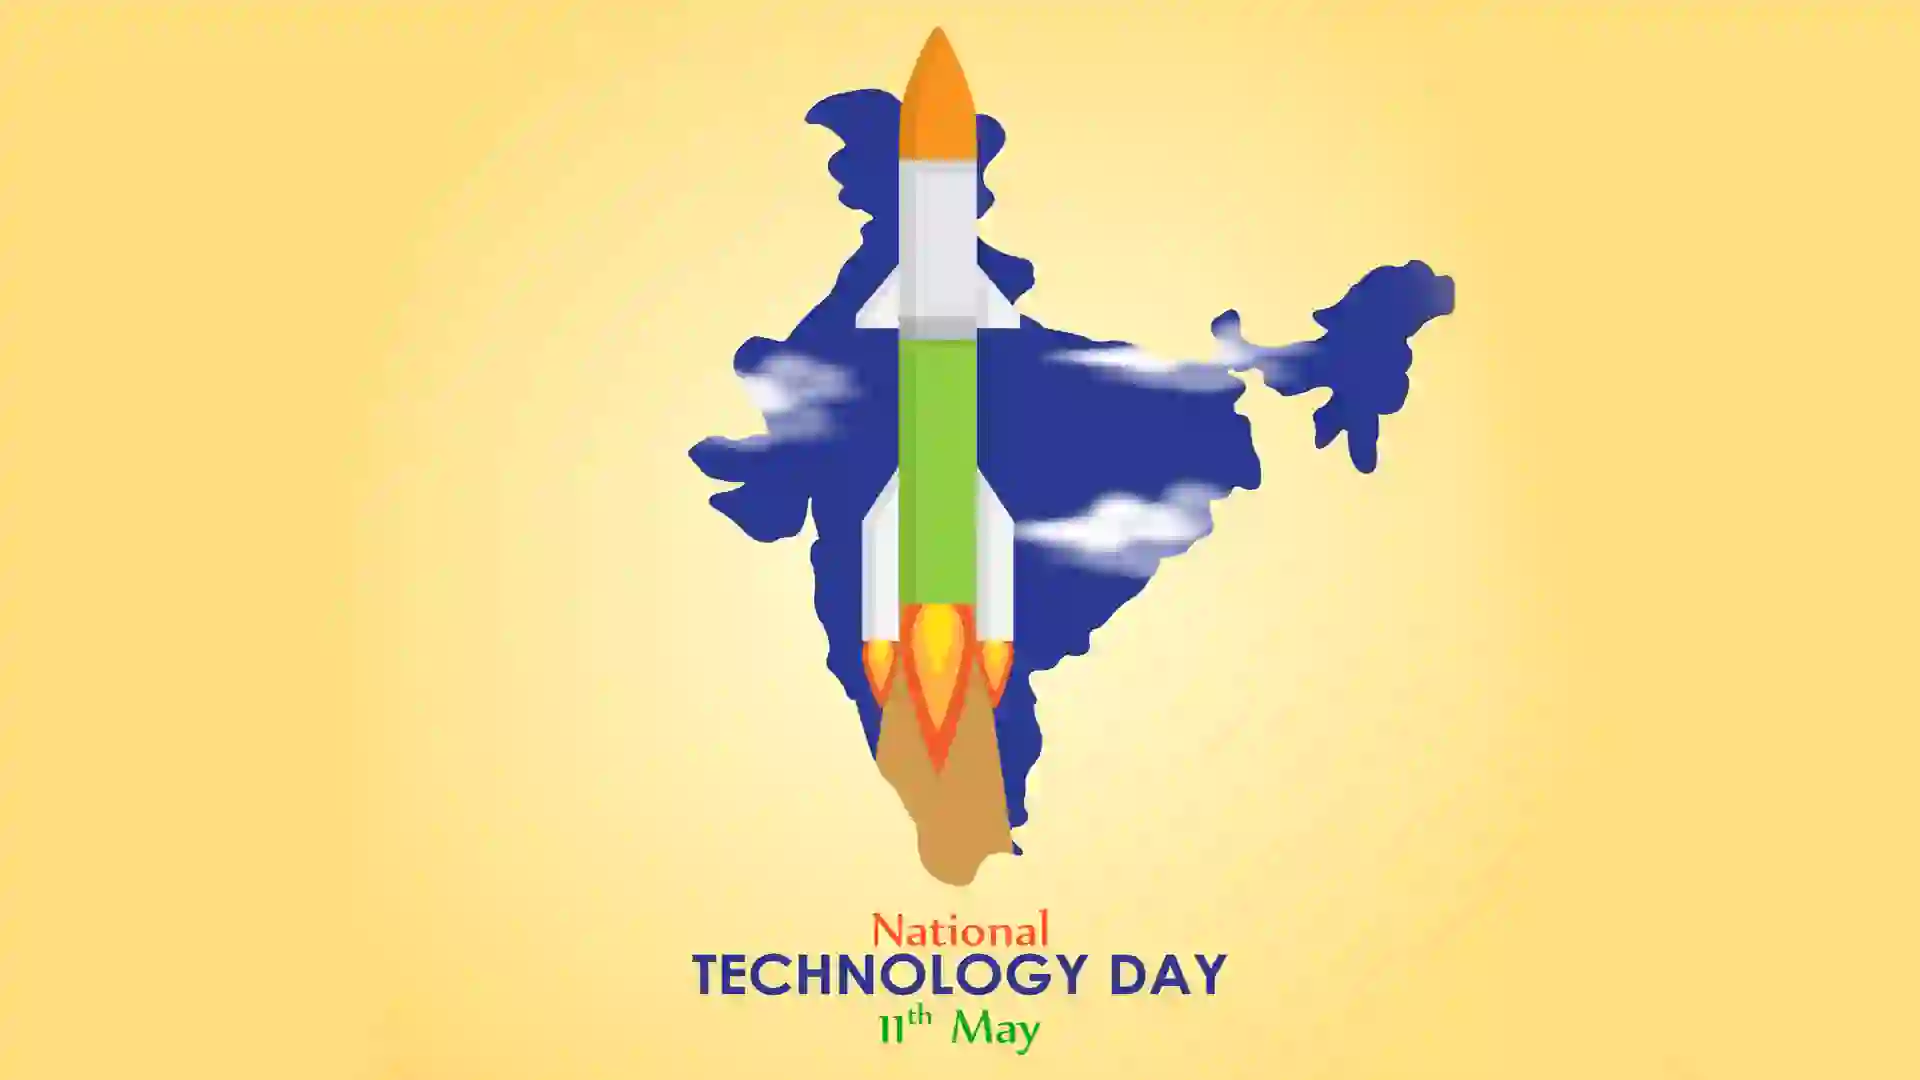 National Technology Day This Post Design By The Revolution Deshbhakt Hindustani